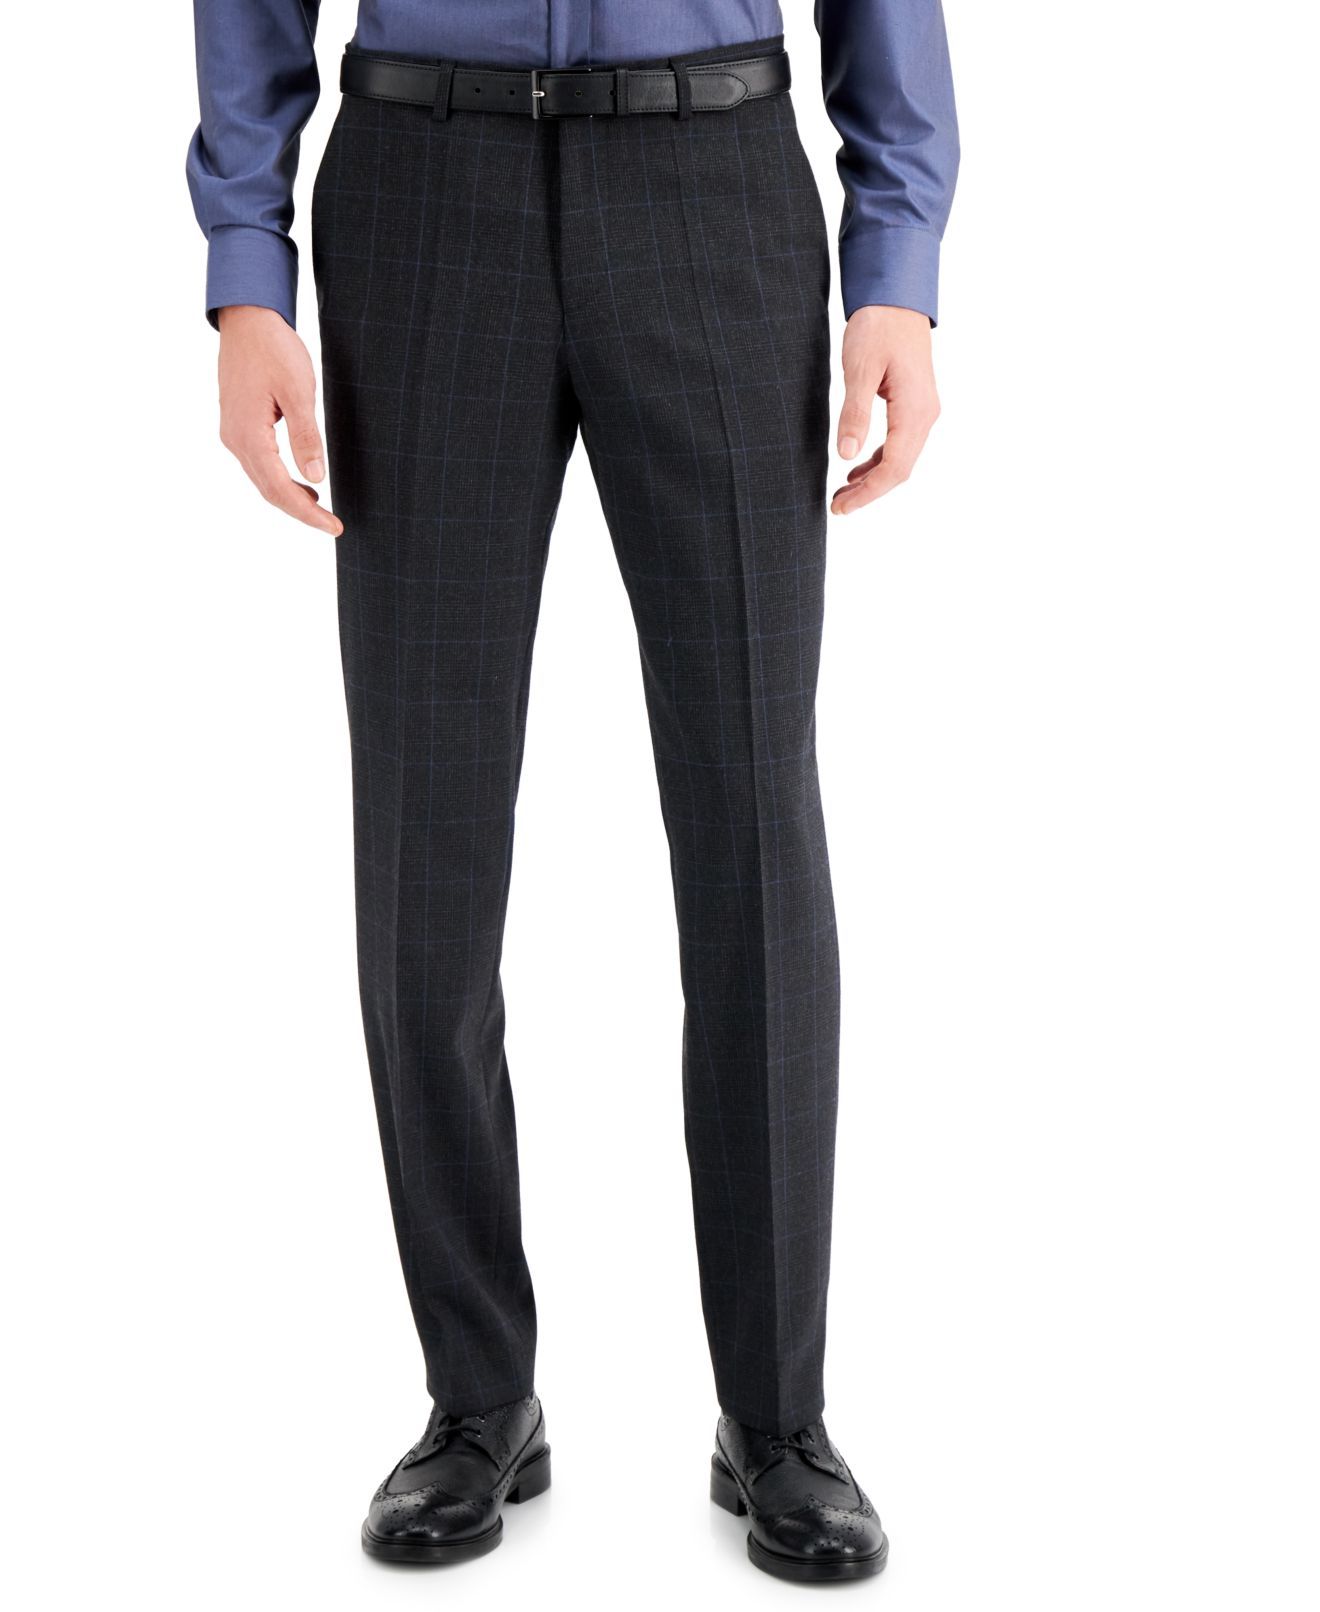 Color: Grays Size Type: Regular Bottoms Size (Men's): 34 Inseam: 32 Type: Pants Style: Dress Pants Occasion: Formal Material: 100% Wool Stretch: YES